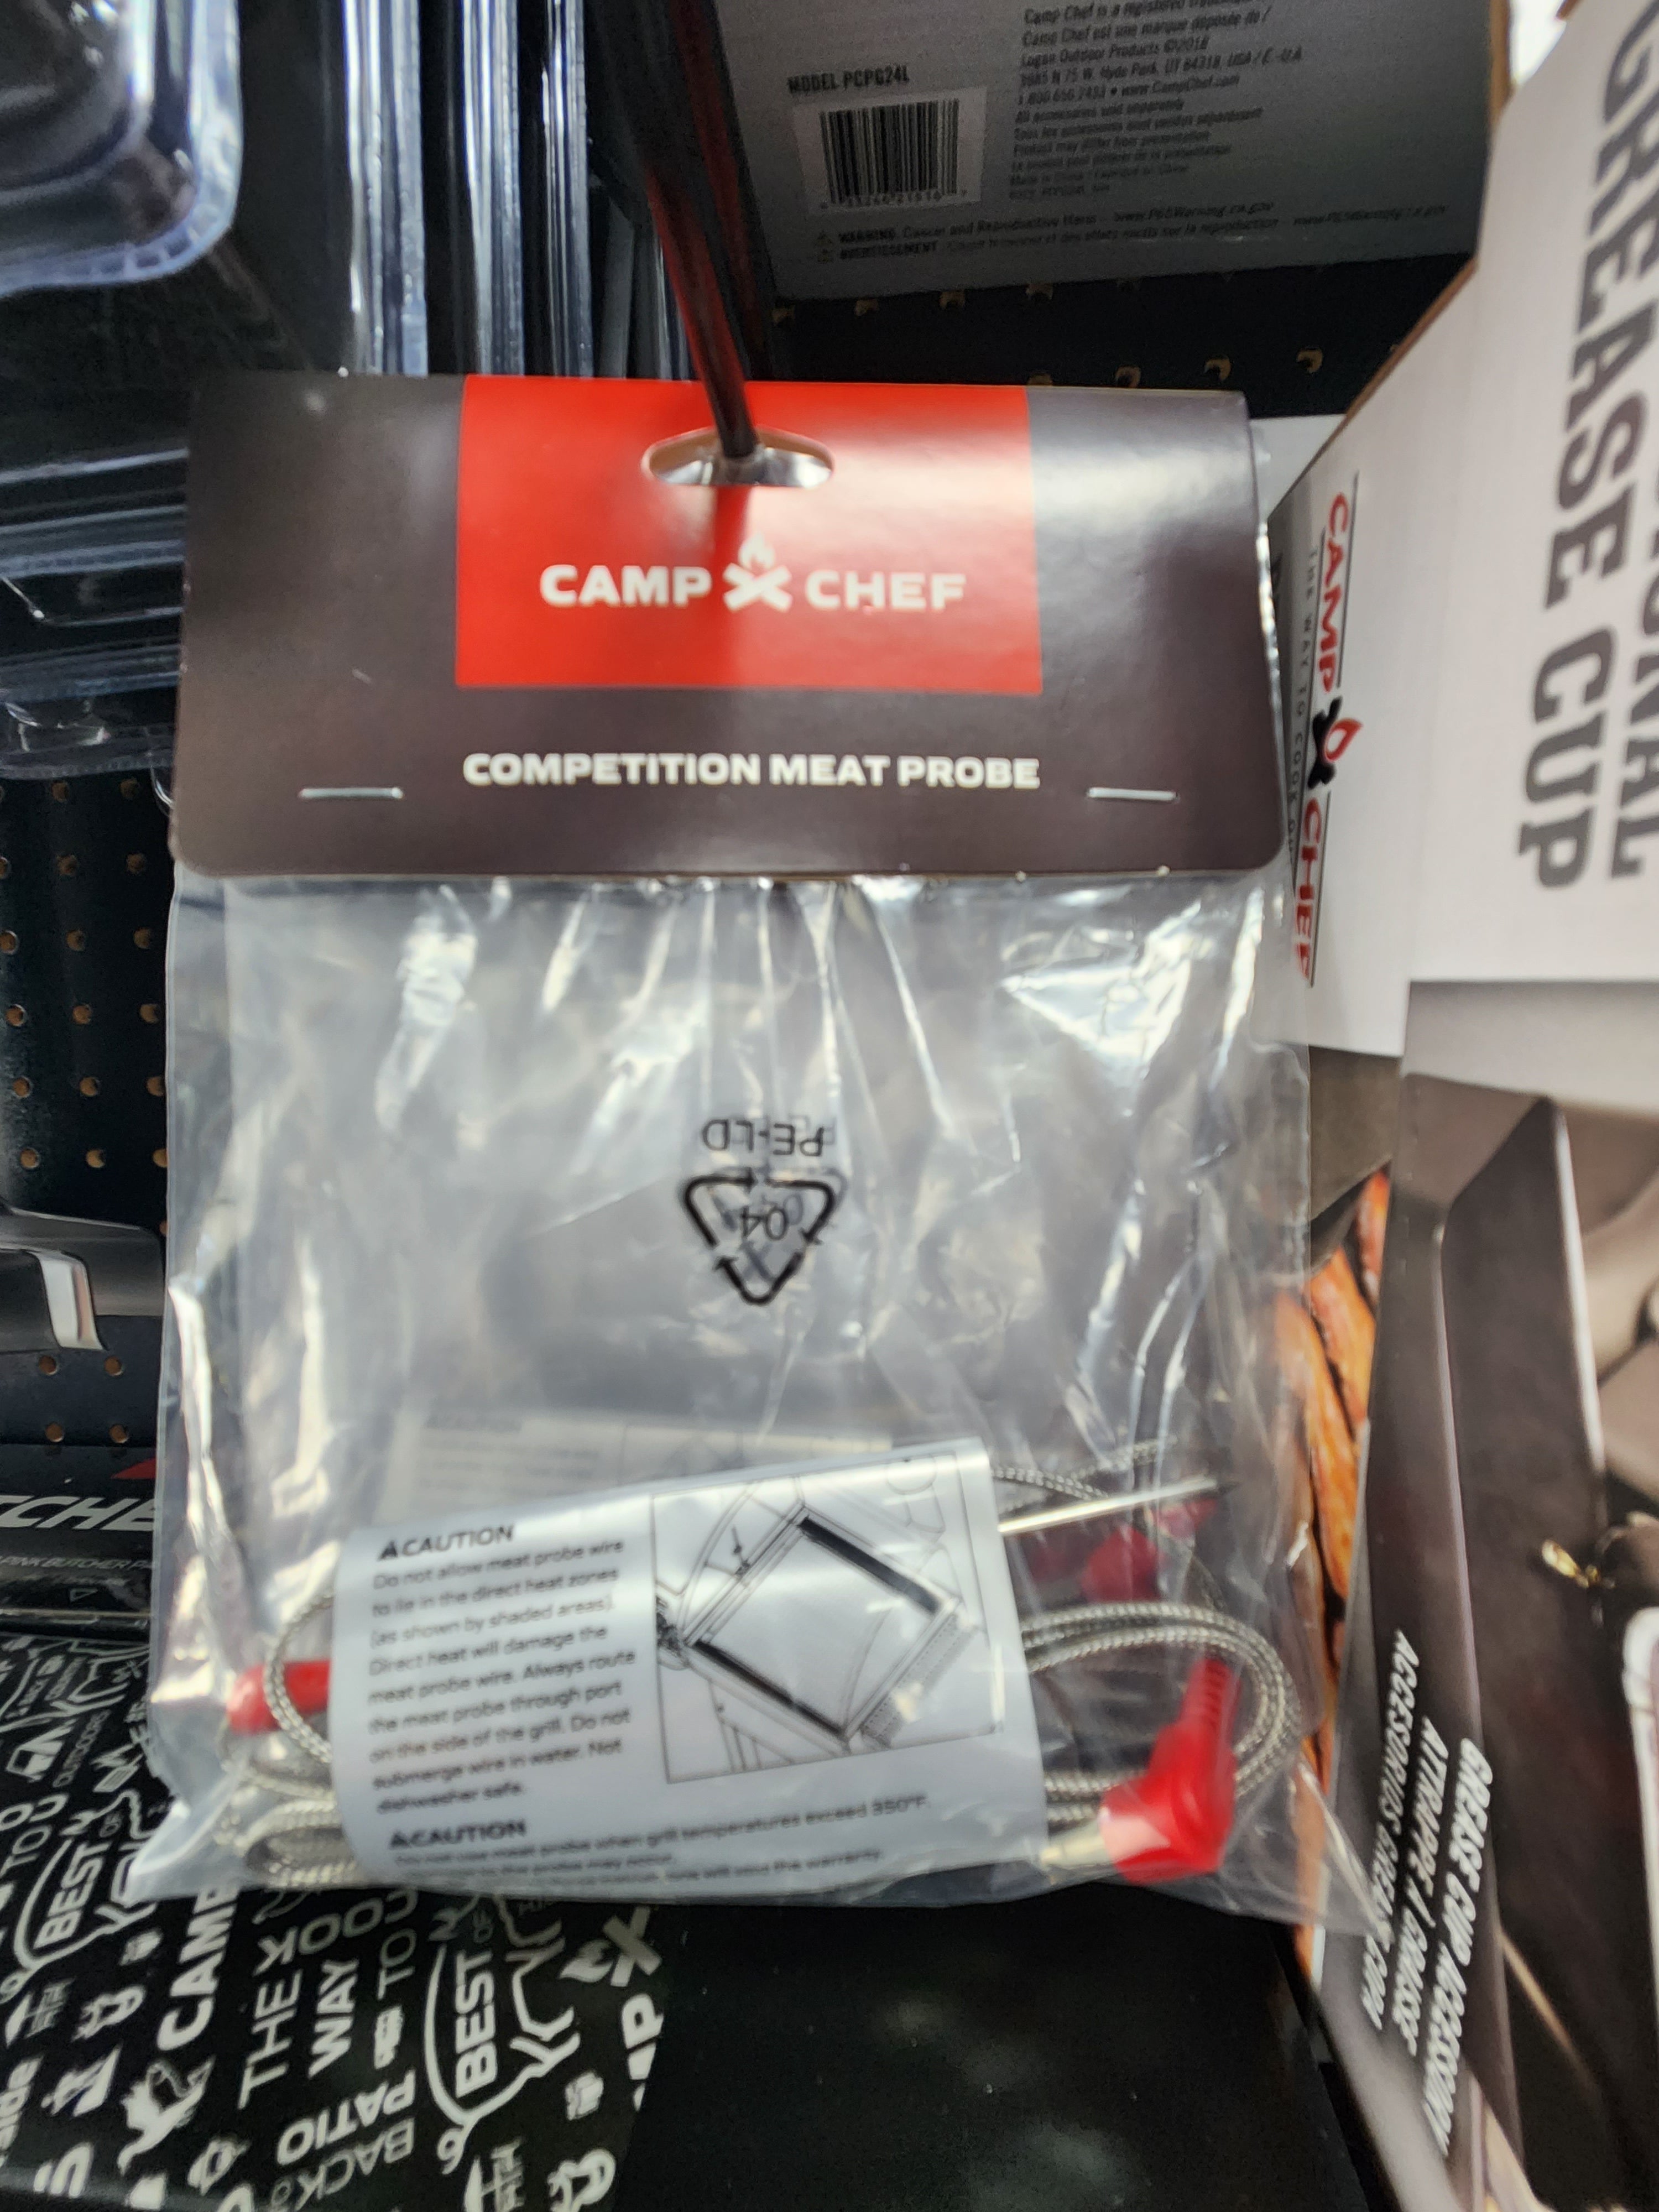 Camp Chef Meat Probe